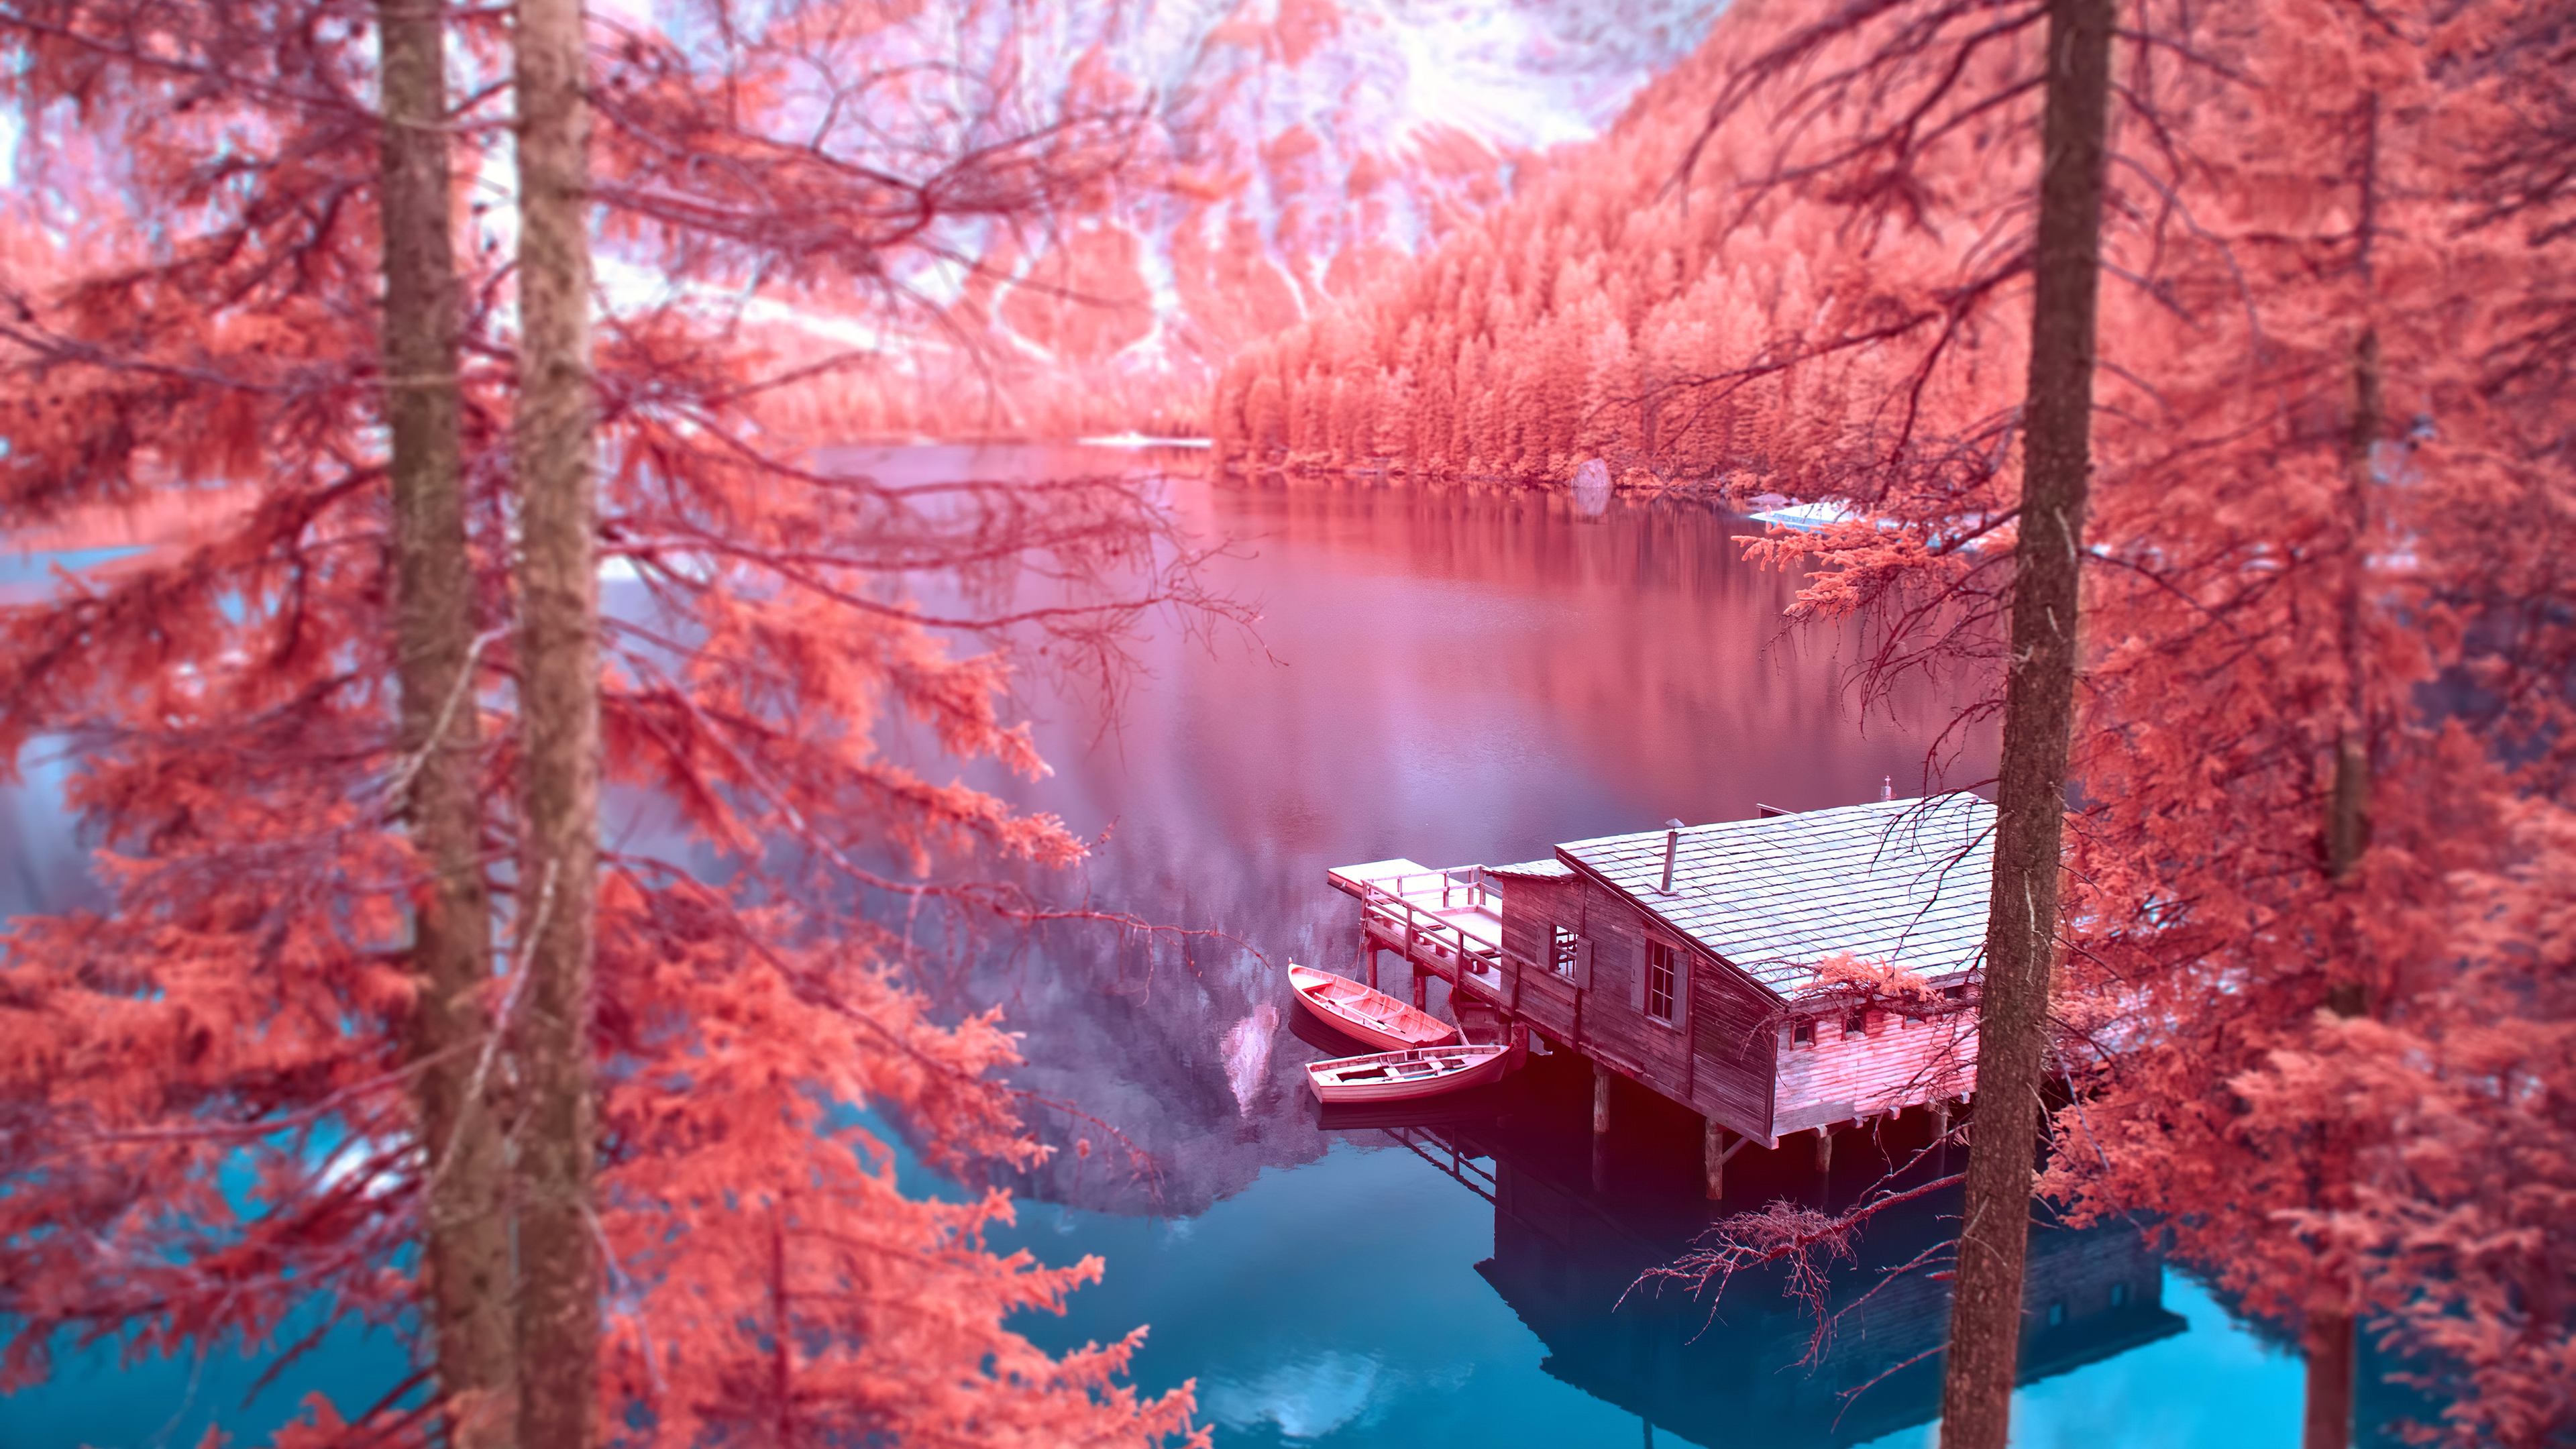 Infrared Photography 4k Ultra HD Wallpaper Background Image